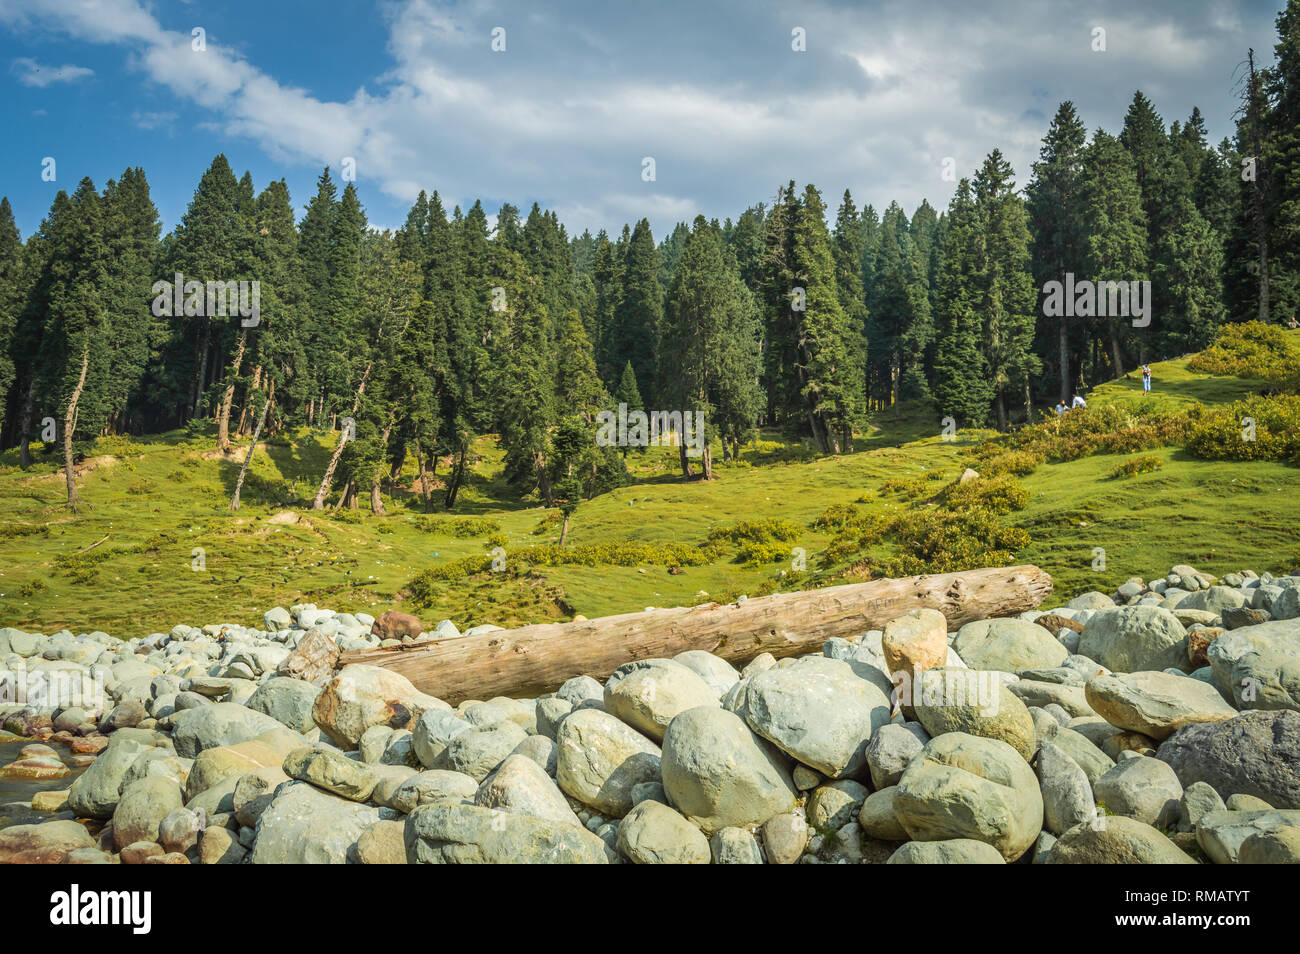 A log of wood in vast field of round boulders of a river bed in a landscape in Kashmir Stock Photo